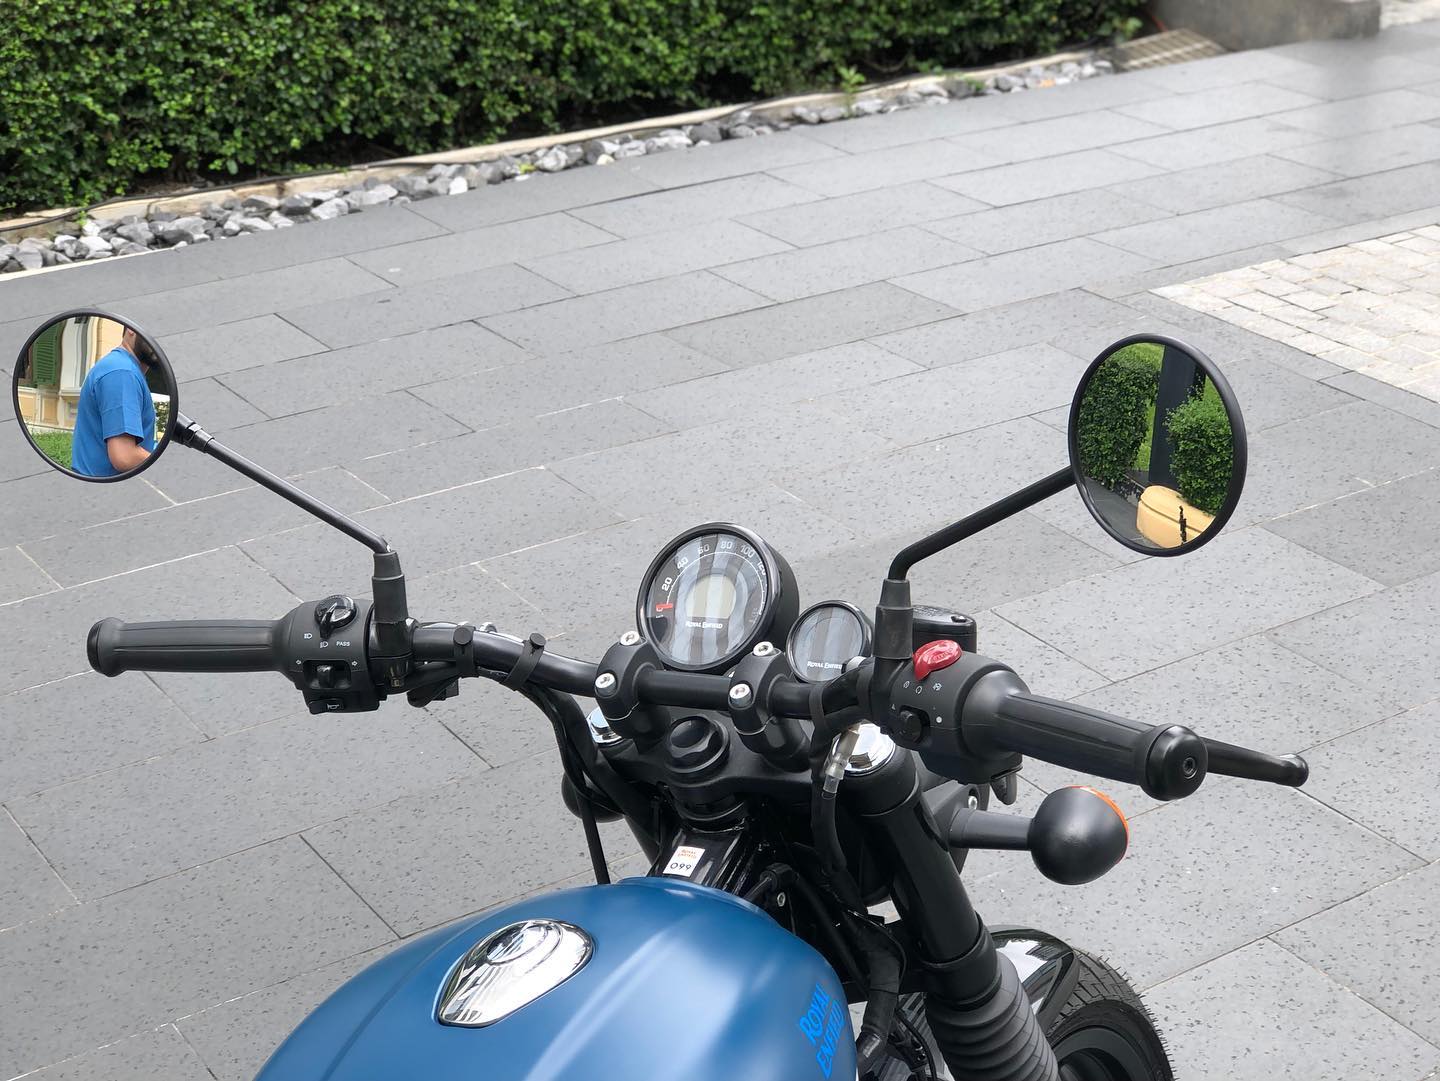 Royal Enfield Hunter 350 is coming to Vietnam, expected price over 110 million VND 2022-Royal-Enfield-Hunter-350-2.jpg